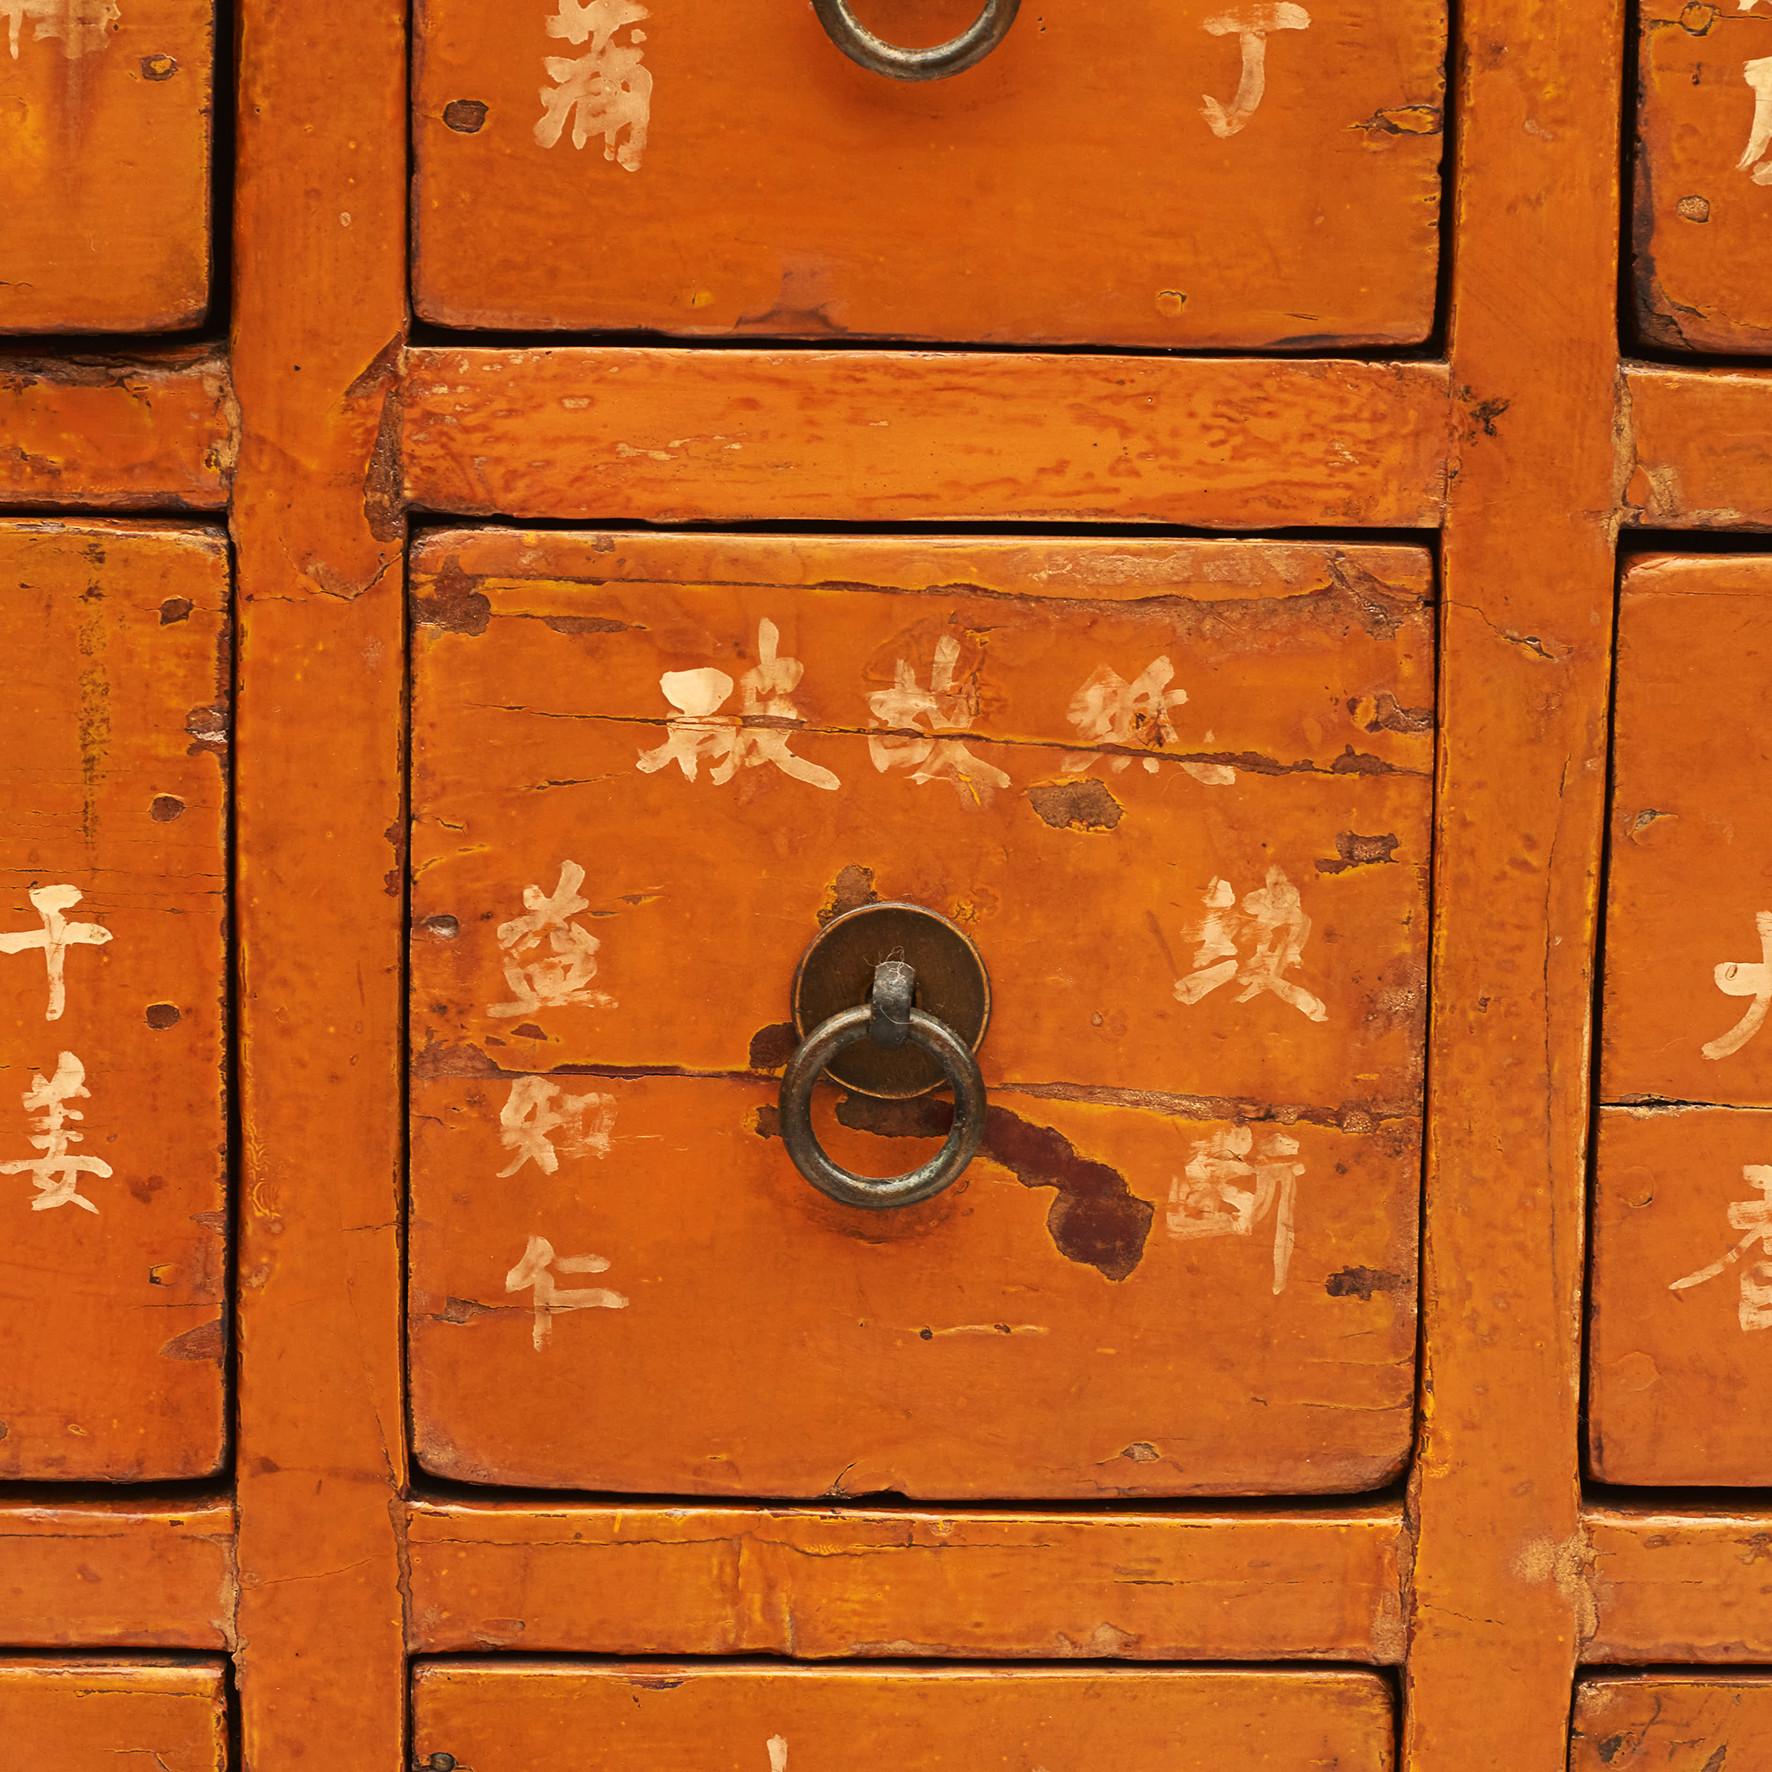 Chinese Apothecary Medicine Chest with 52 Drawers